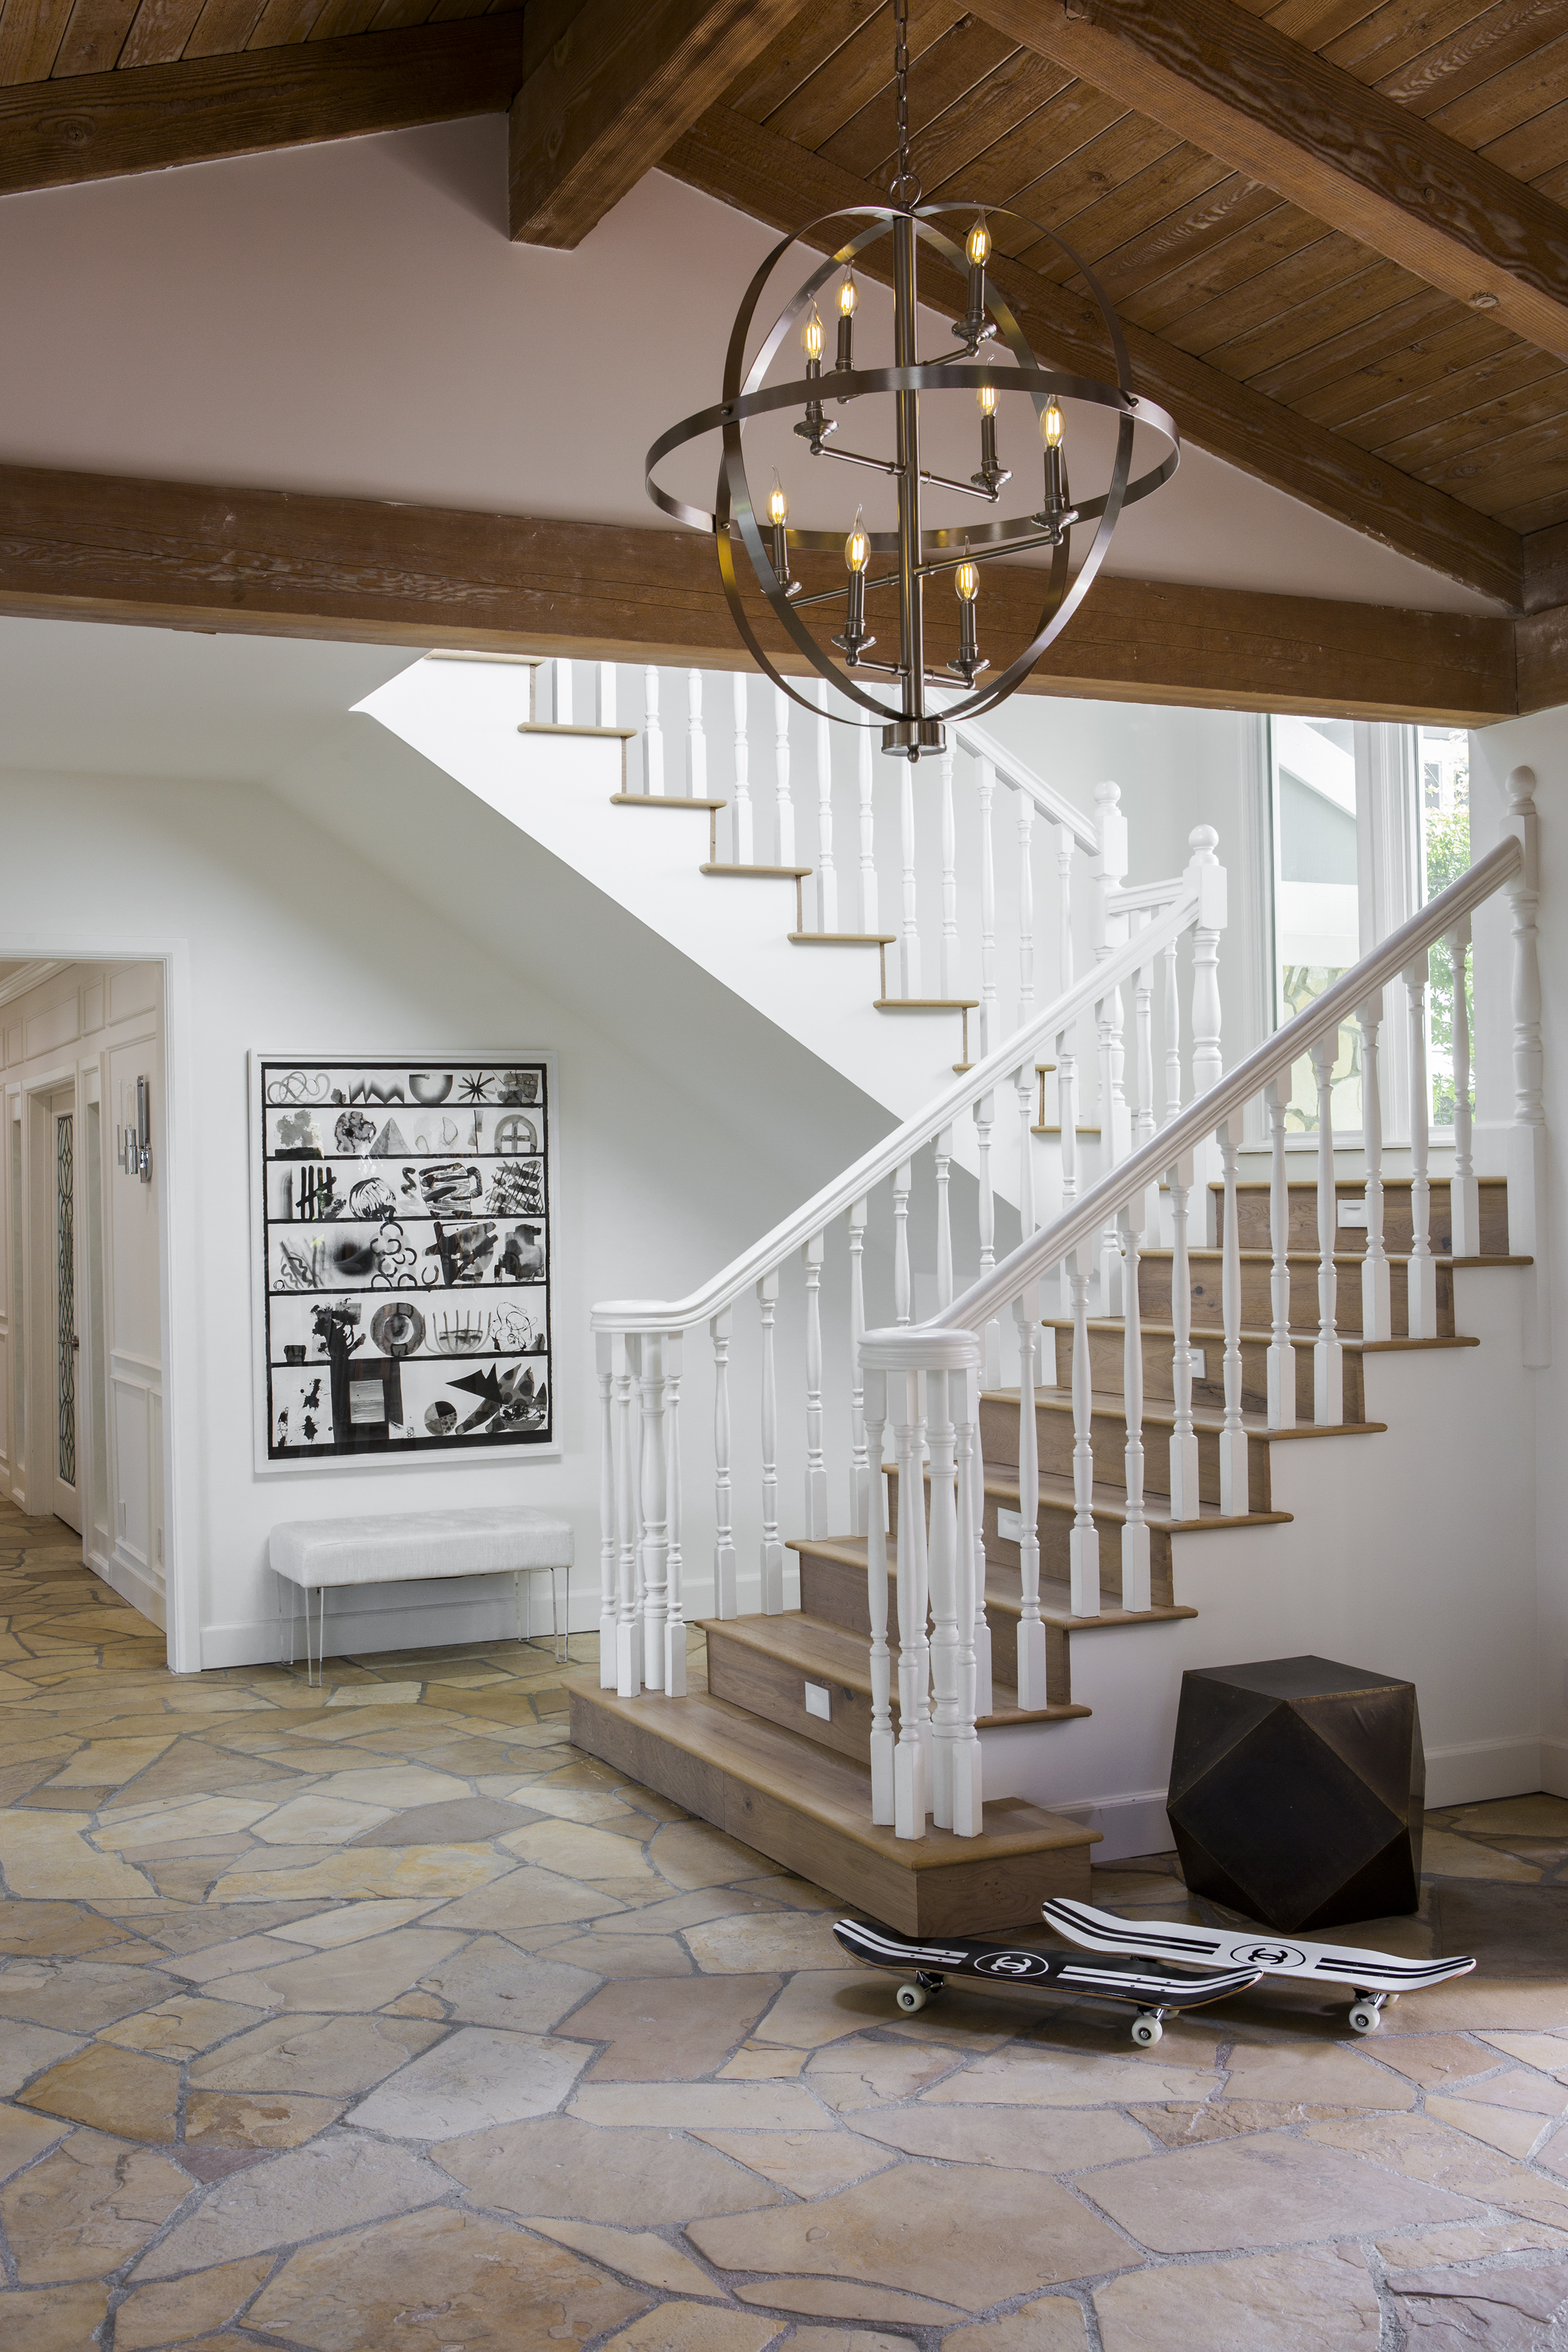 Renovation Inspiration foyer of bel air home high ceilings with chandelier